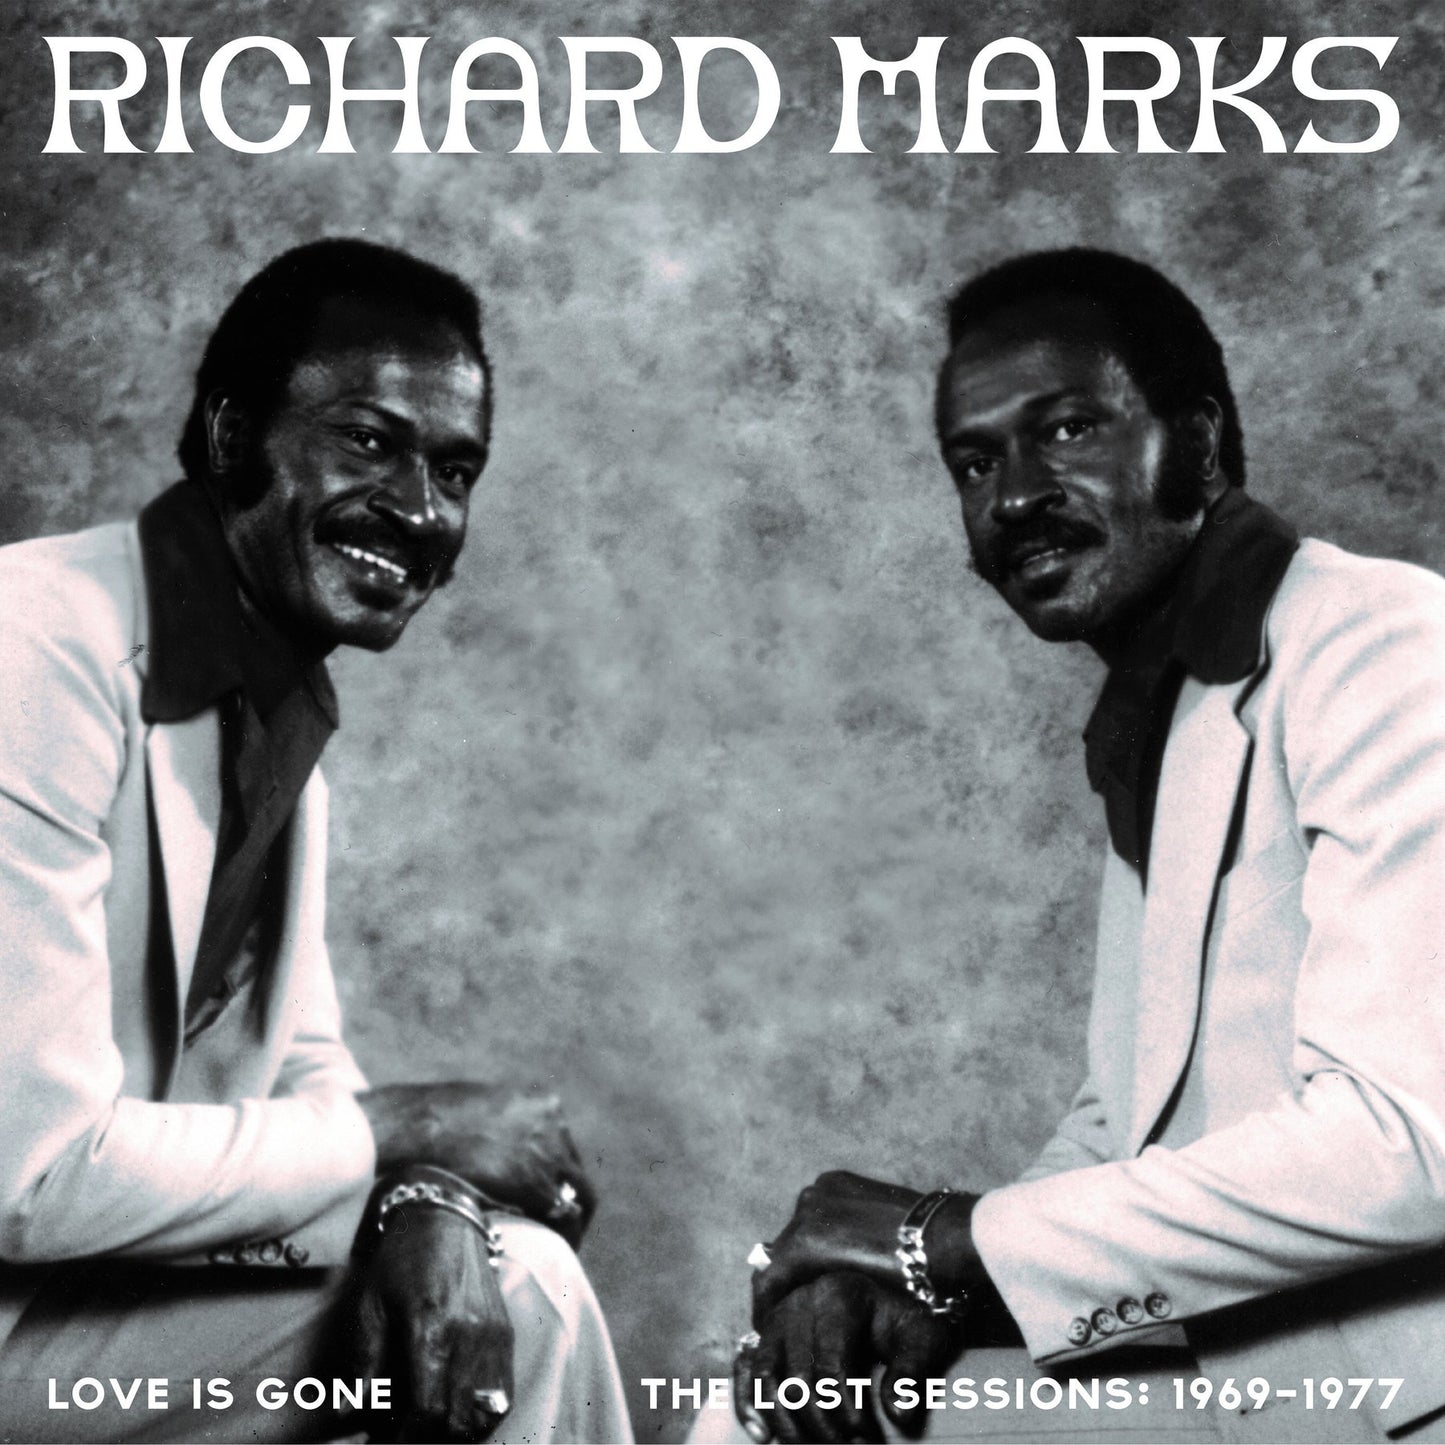 Richard Marks - Love is Gone: the Lost Sessions 1969-1977 2xLP